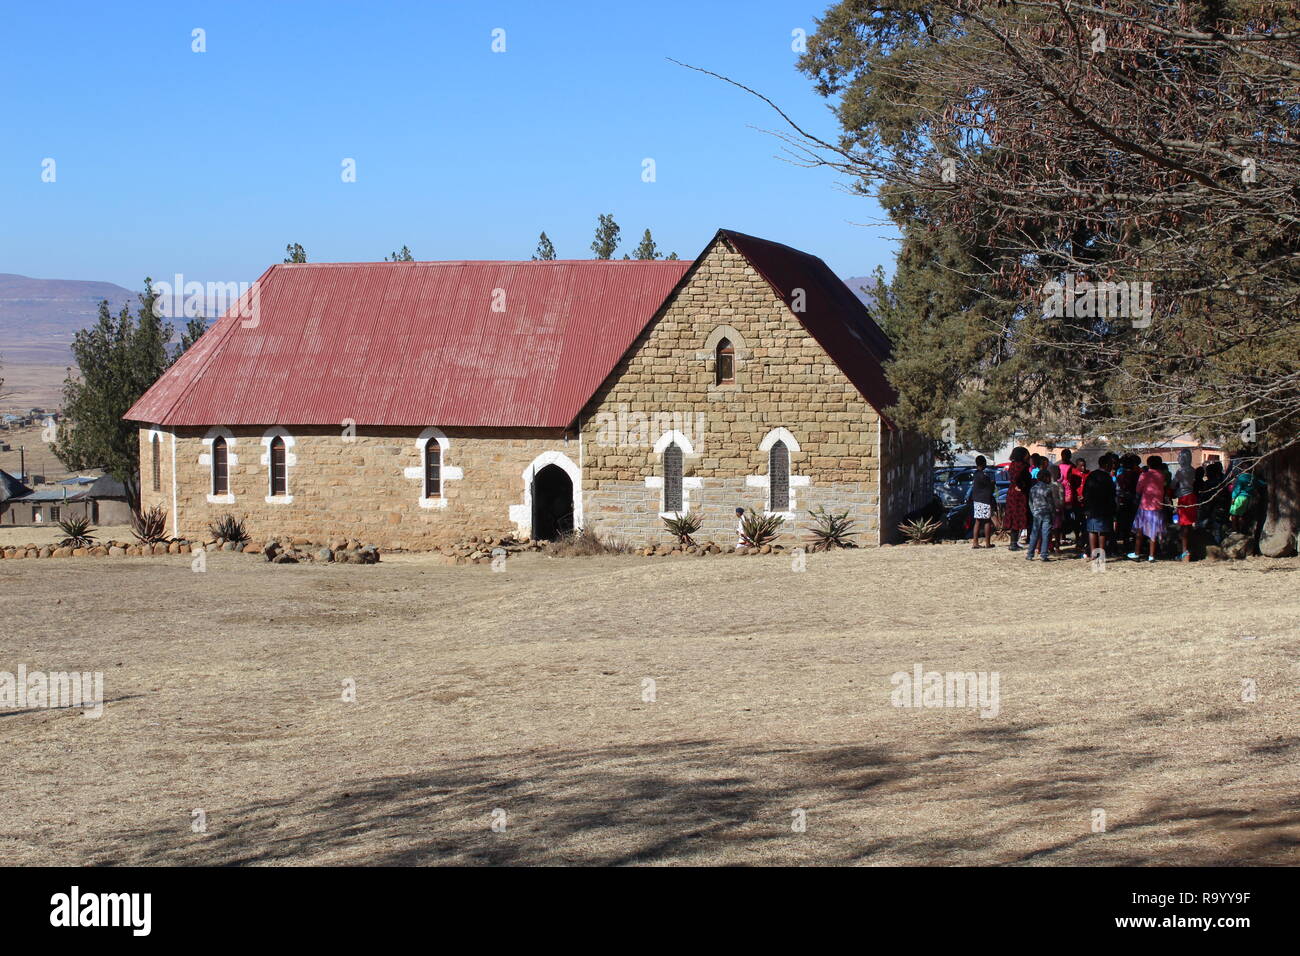 A church in a vlllage at the Isandlwana battle site, KwaZulu-Natal, South Africa, where the British Army where defeated by the Zulus on 22nd Jan 1879 Stock Photo